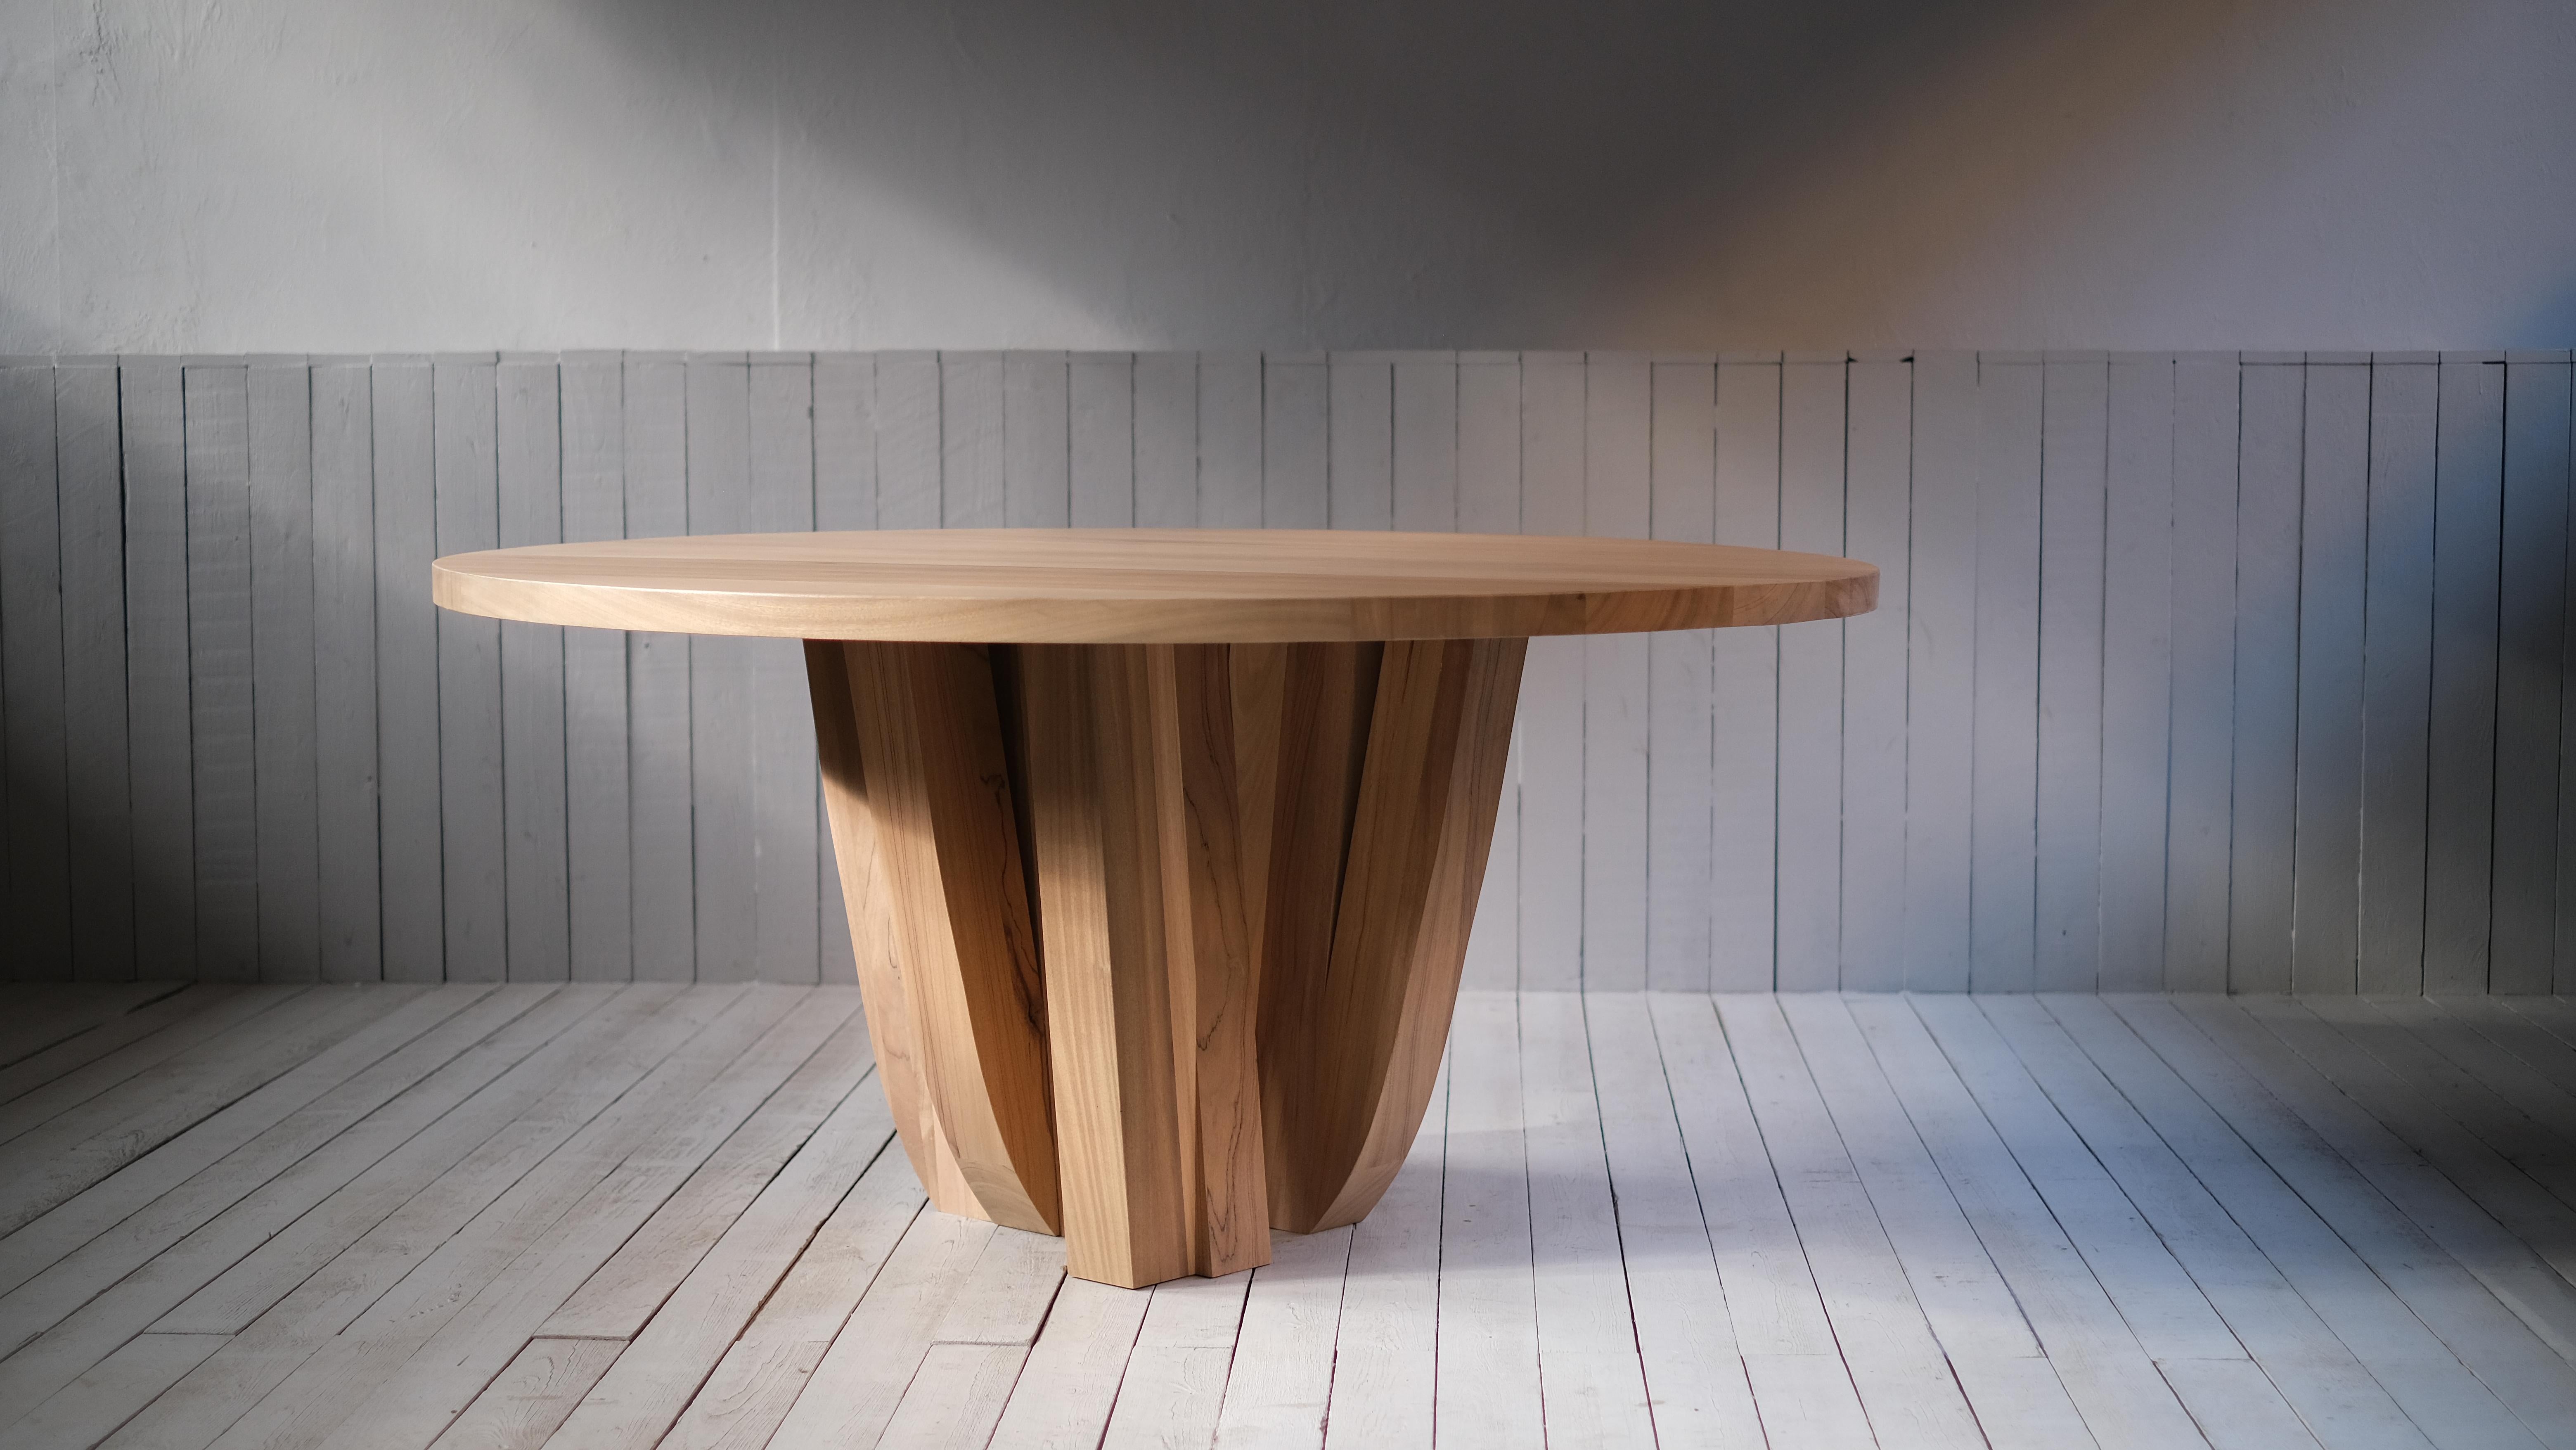 Zoumey round table by Arno Declercq
Dimensions: diameter 160 x height 75 cm
Materials: African walnut

A forest of table legs made out of 16 pieces of African walnut.
A dining table for 6 persons

Arno Declercq
Belgian designer and art